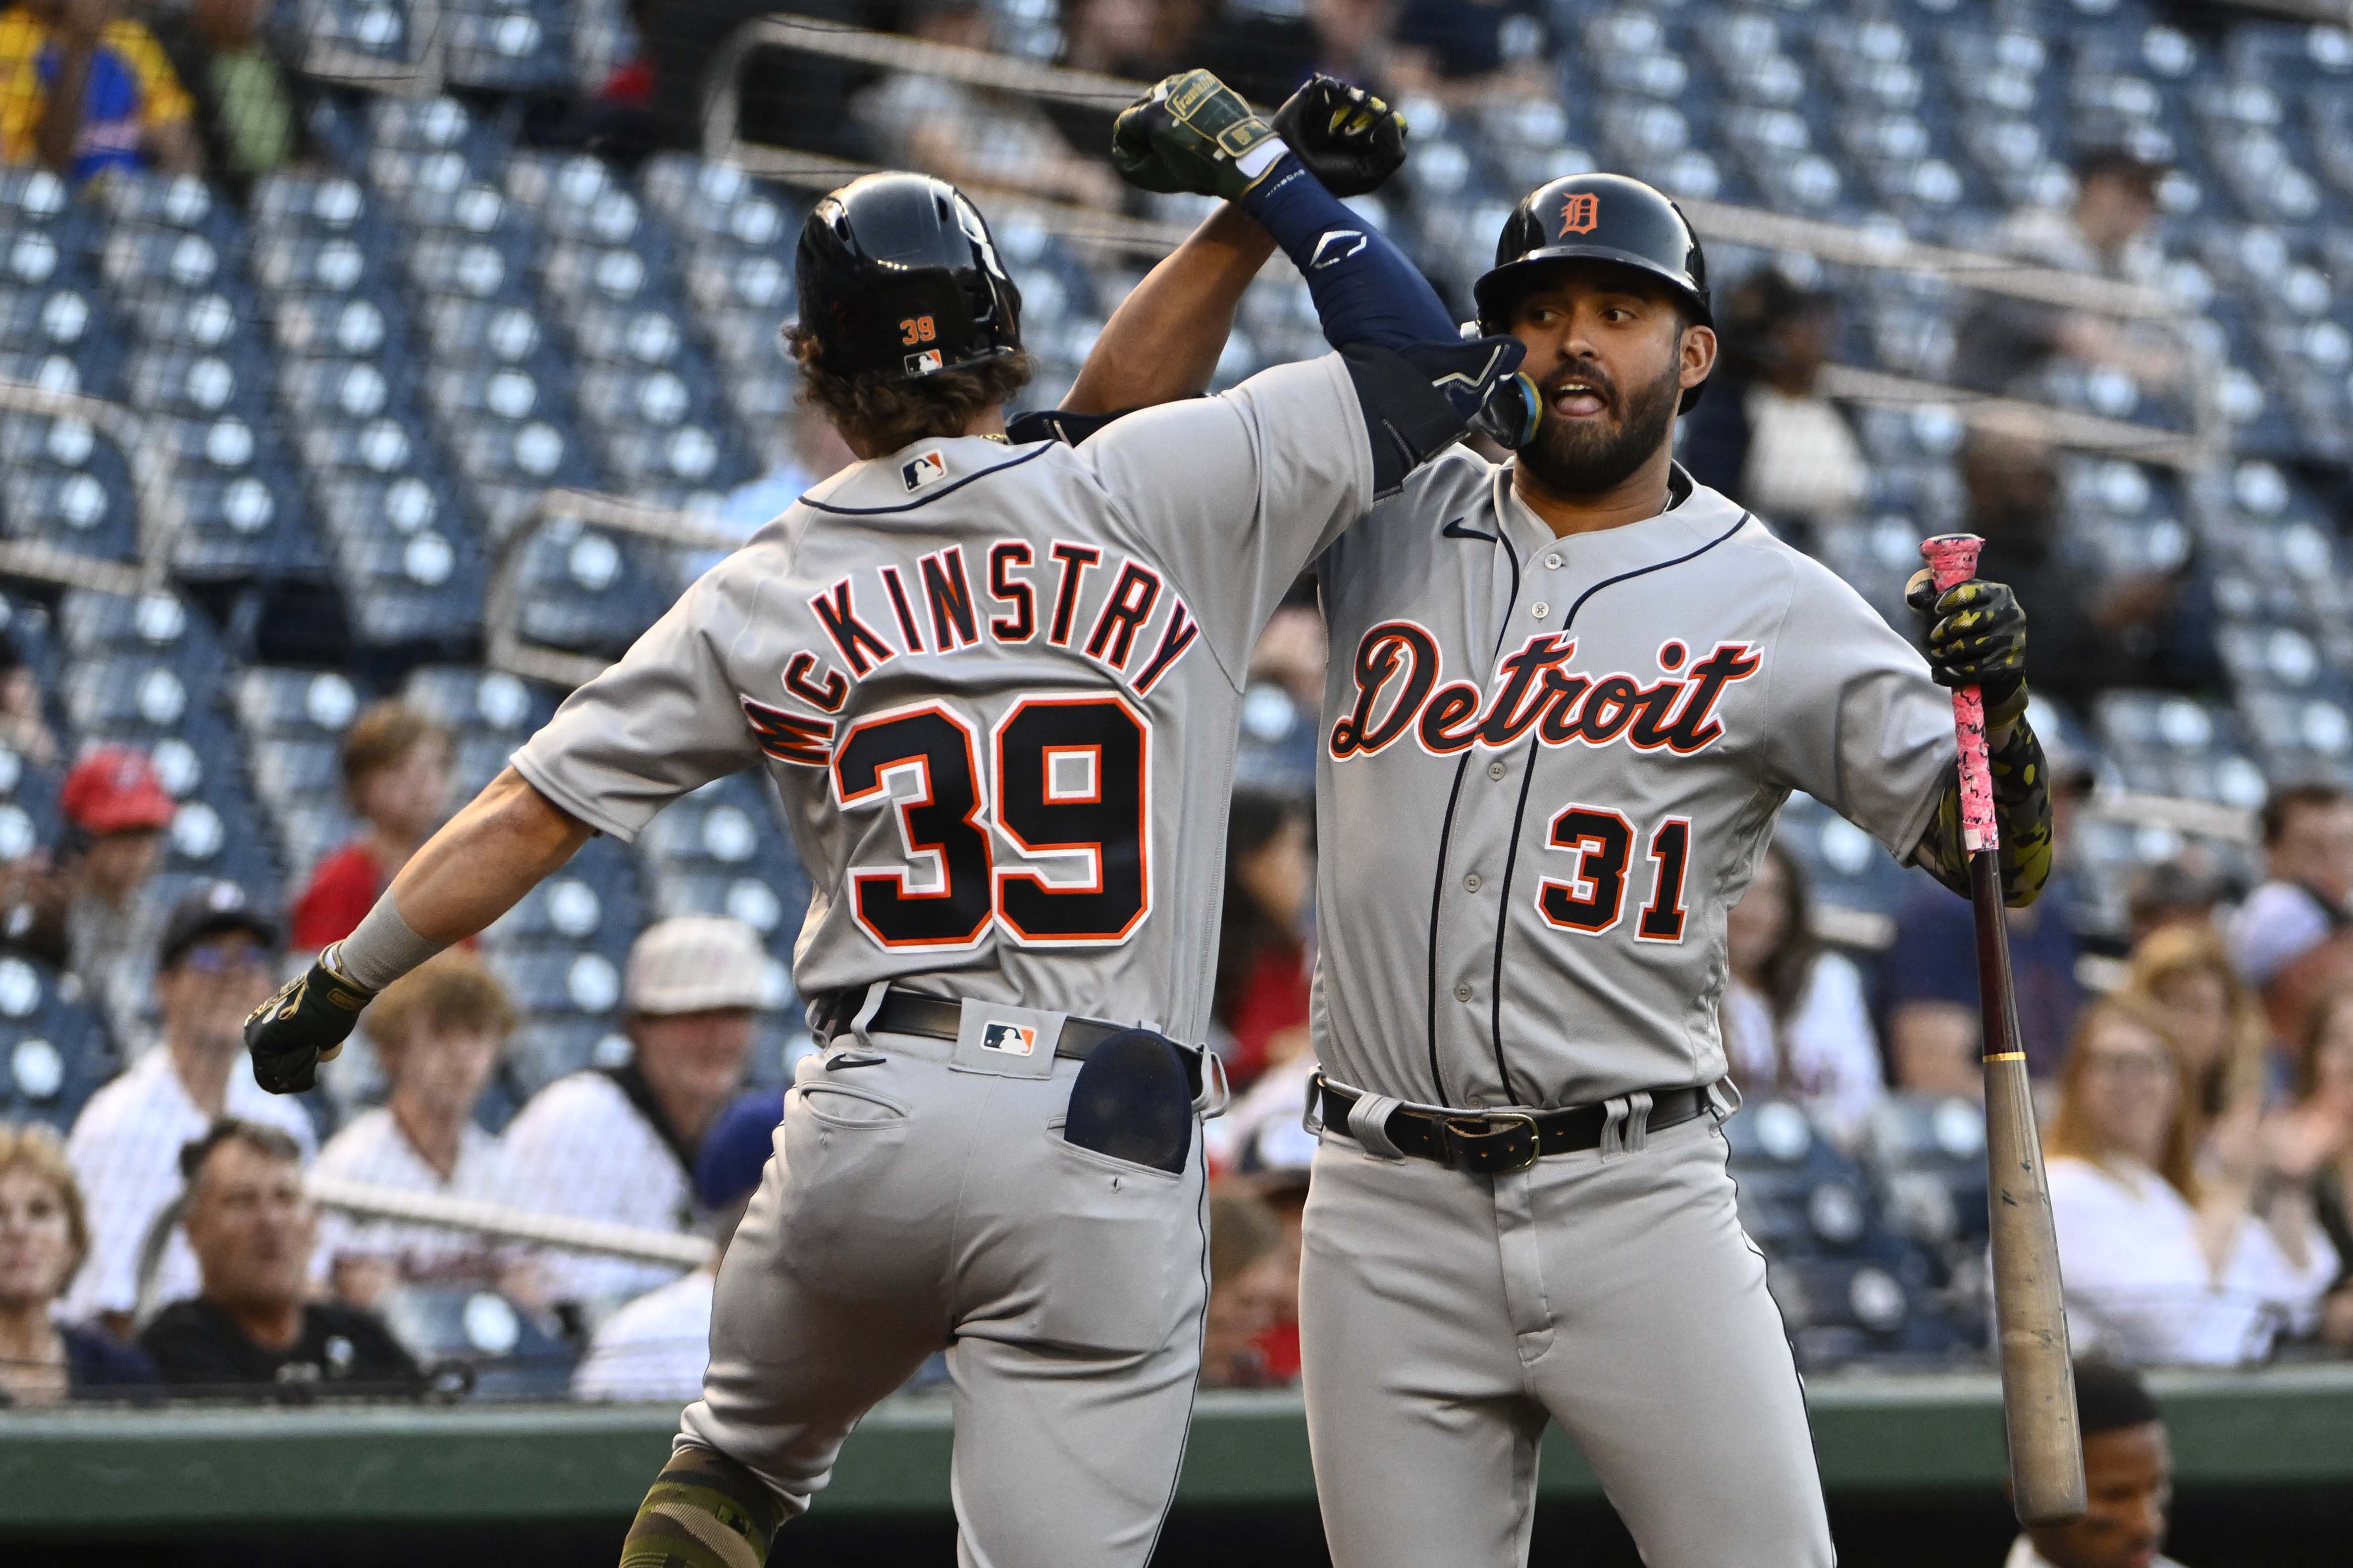 Baddoo homers, drives in 4, Tigers outlast Nationals 8-6 - The San Diego  Union-Tribune